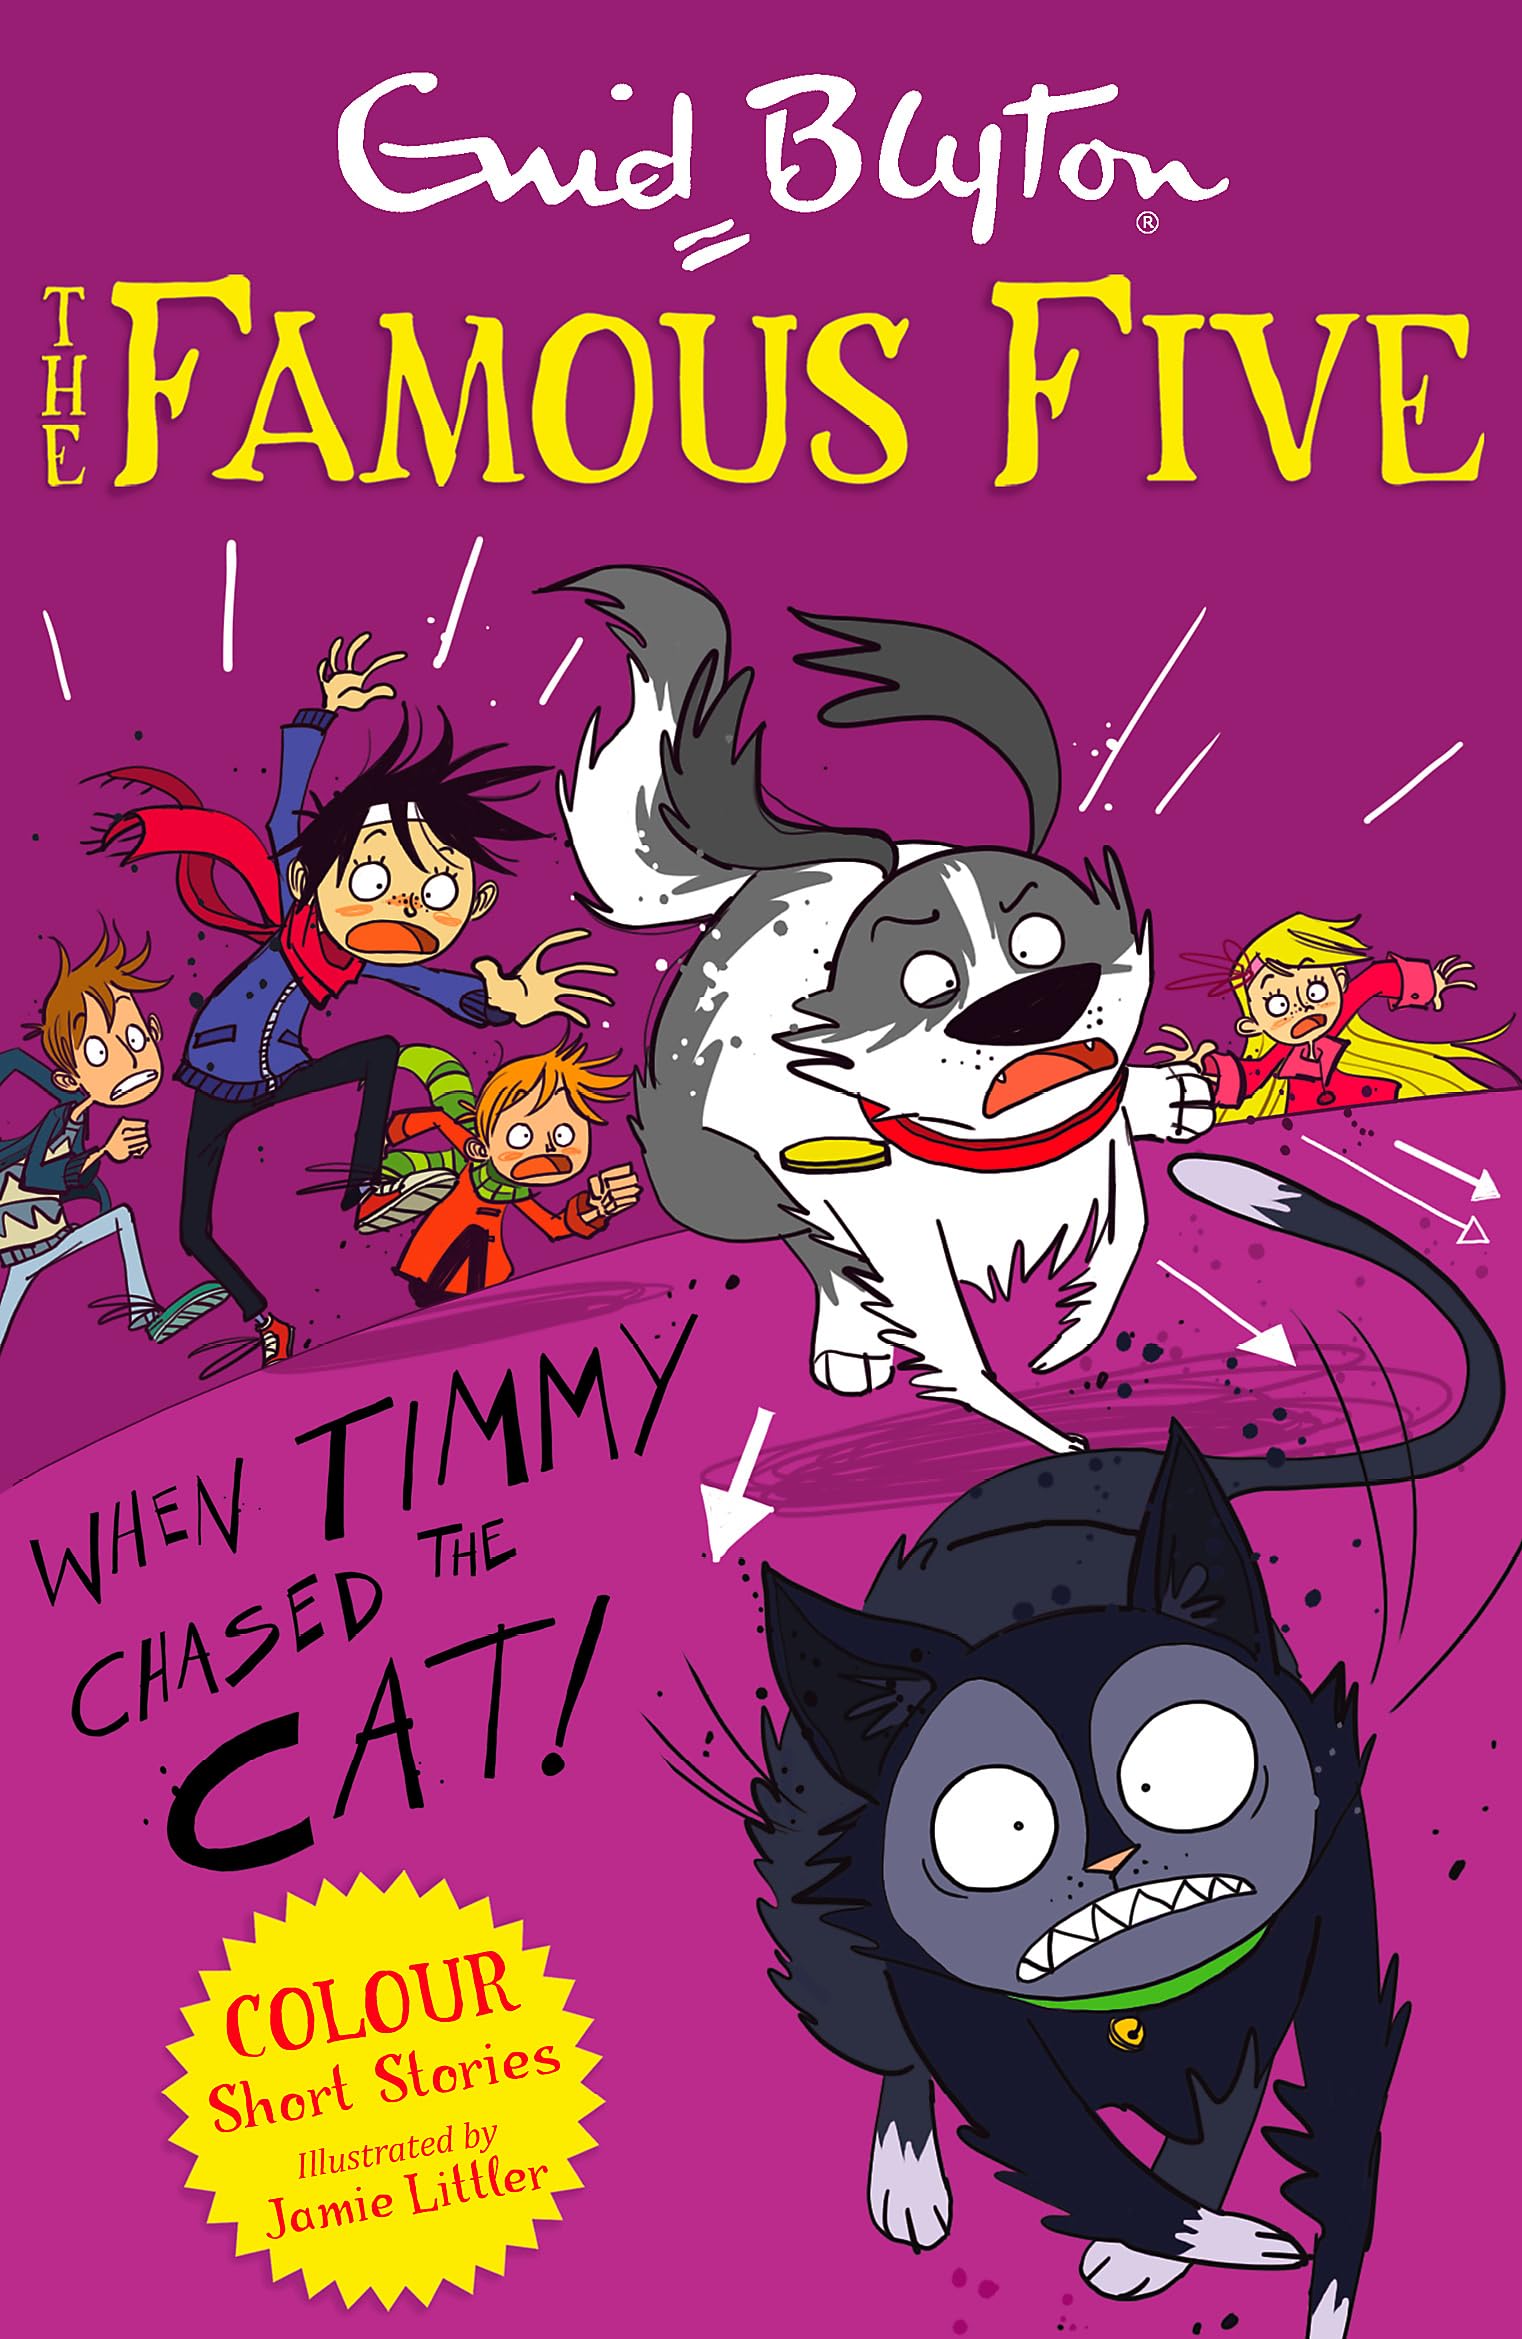 The Famous Five Adventures: When Timmy Chased the Cat